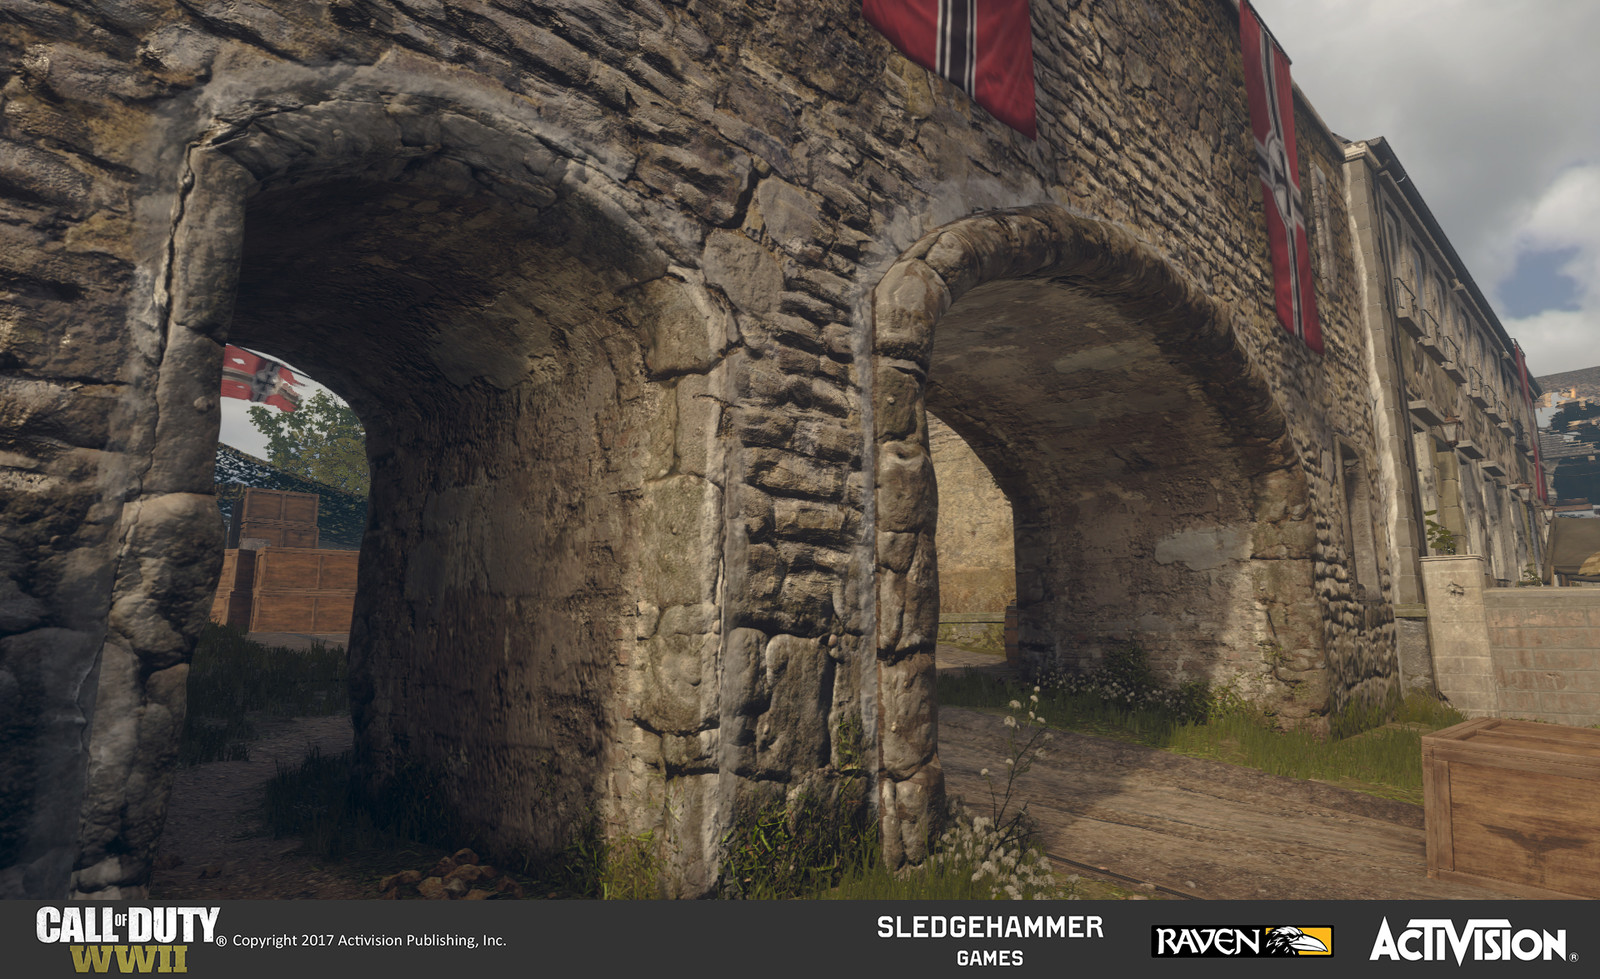 Worked on geometry and blending existing materials on arched passageways for bridge.